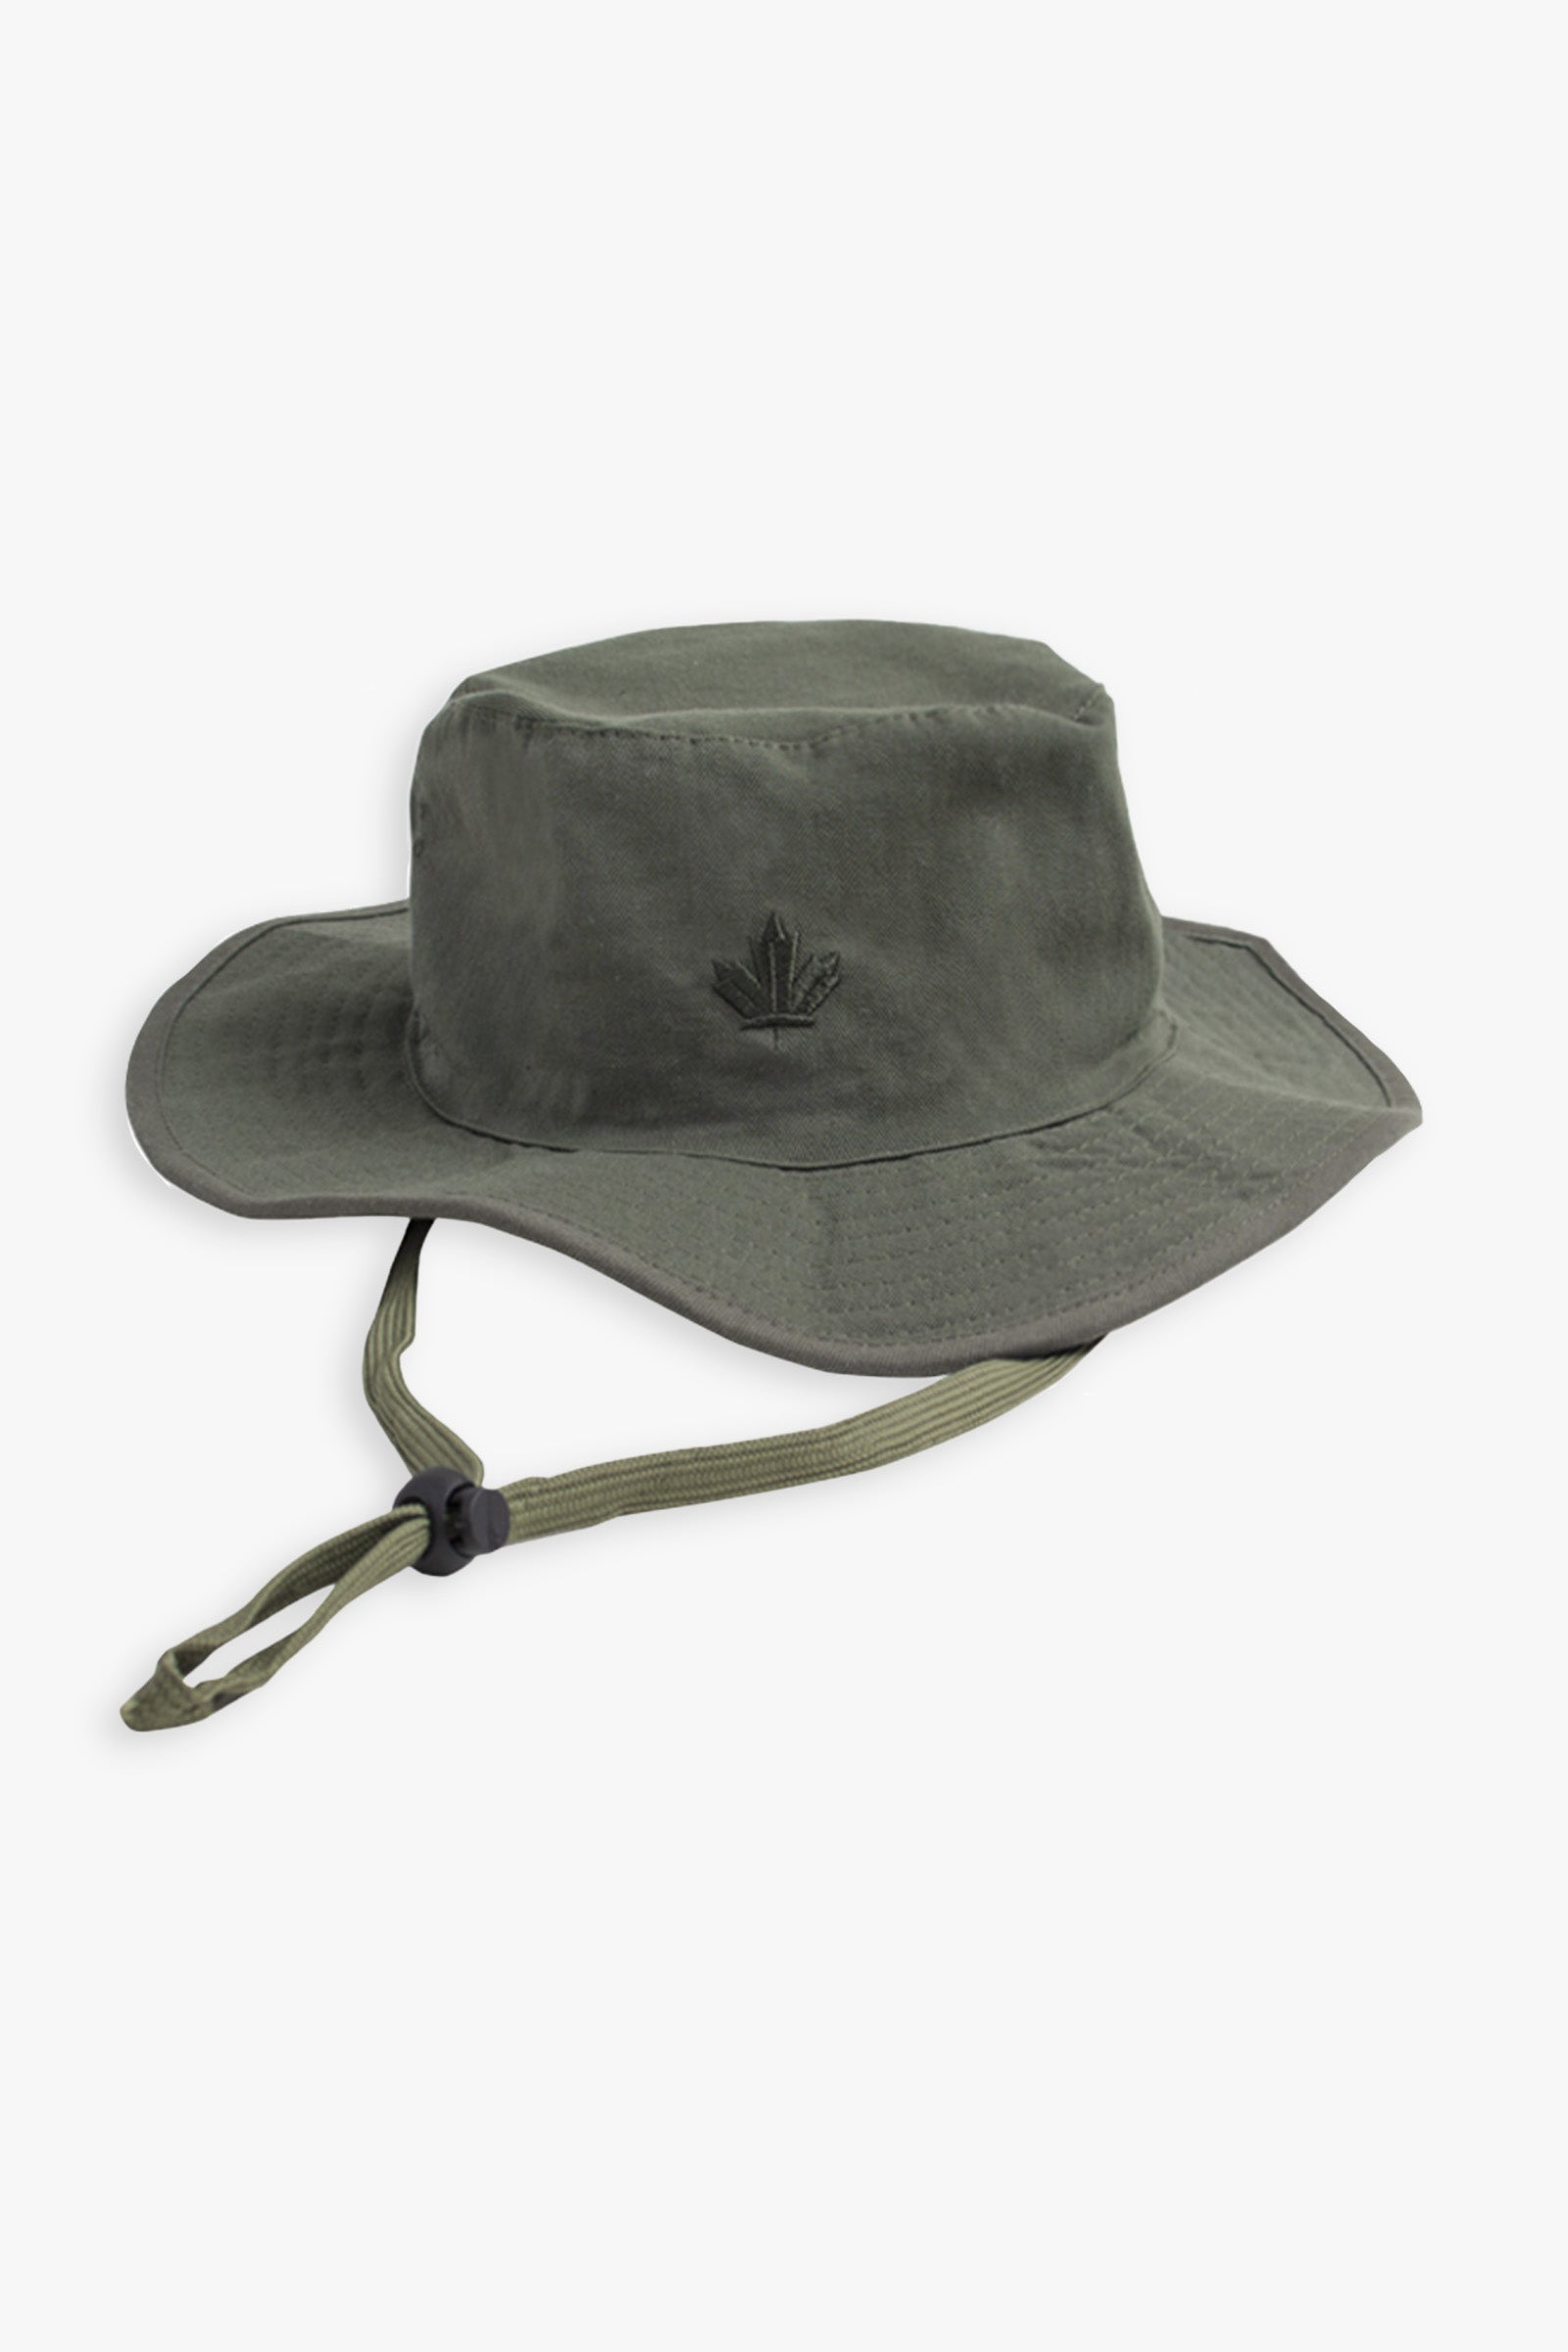 Canada Embroidered Maple Lead Adult Boonie Hat